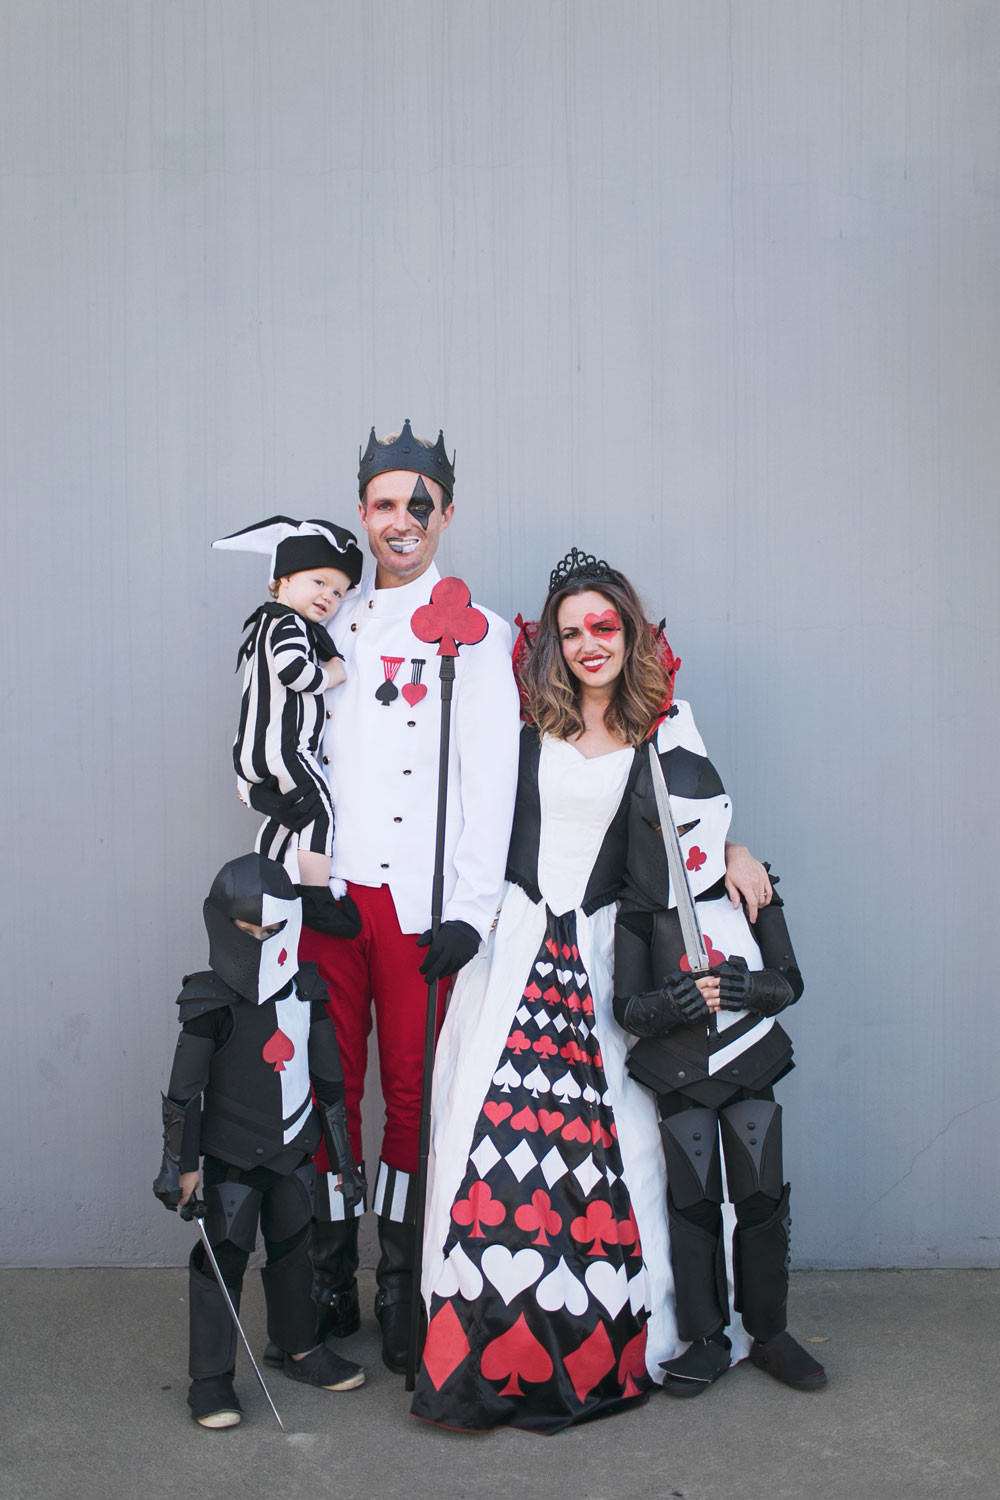 Deck Of Cards Halloween Costumes
 DIY QUEEN OF HEARTS FAMILY COSTUME Tell Love and Party